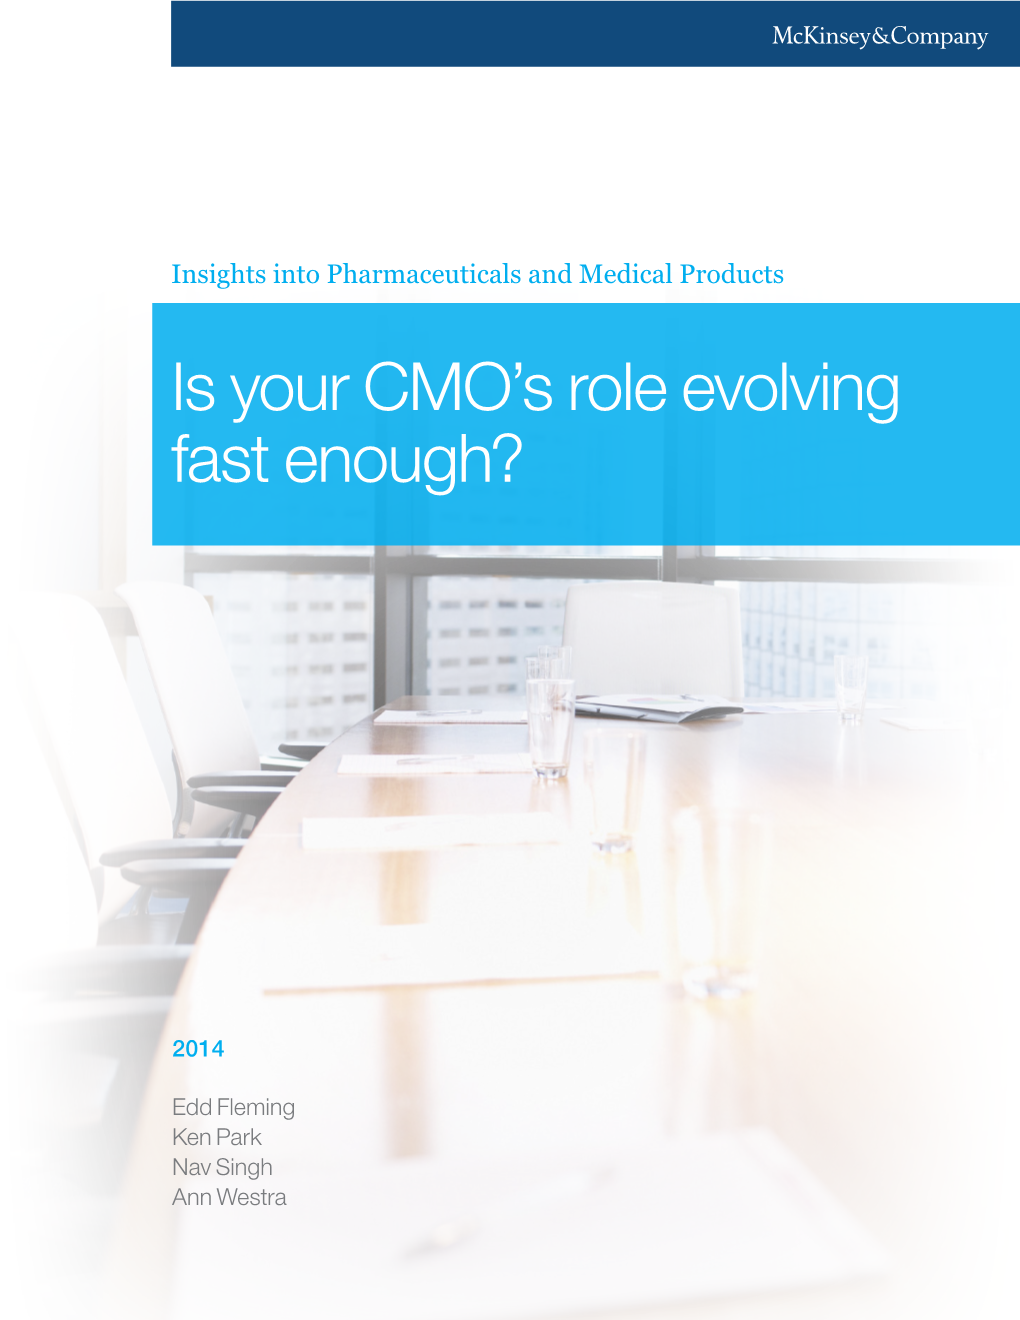 Is Your CMO's Role Evolving Fast Enough?